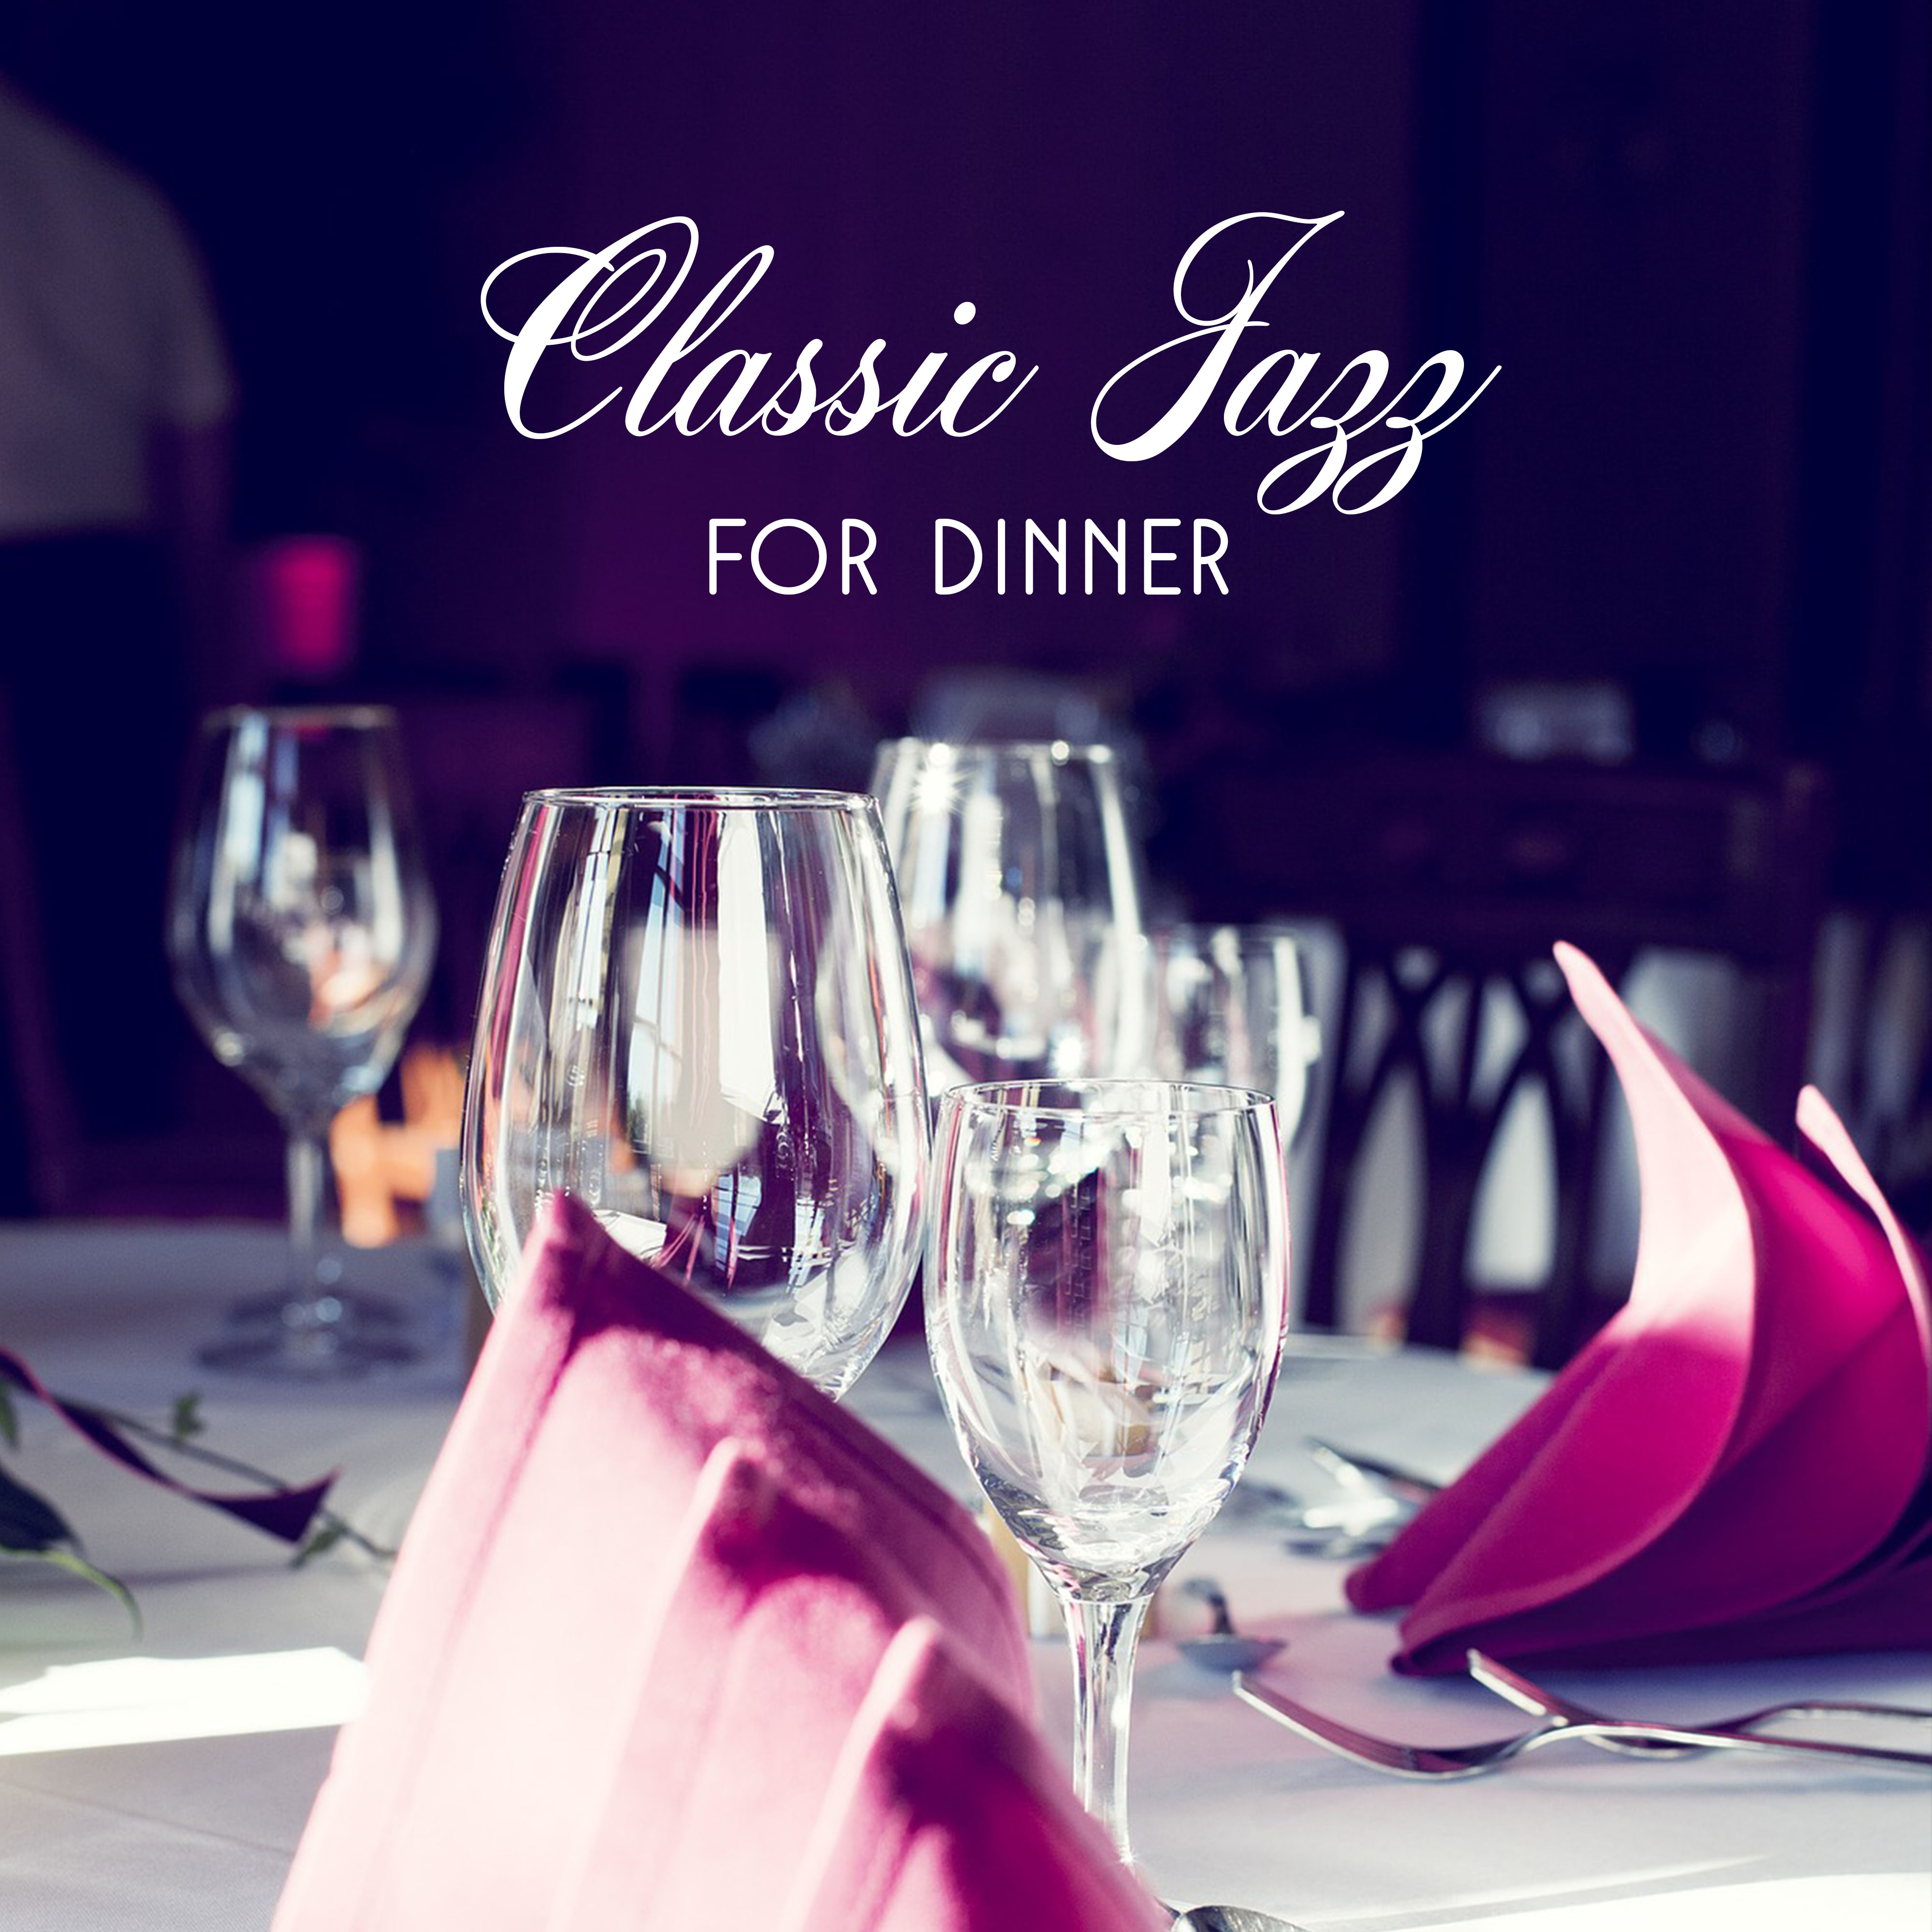 Classic Jazz for Dinner – Calming Jazz, Instrumental Music, Mellow Piano Sounds, Perfect for Family Dinner